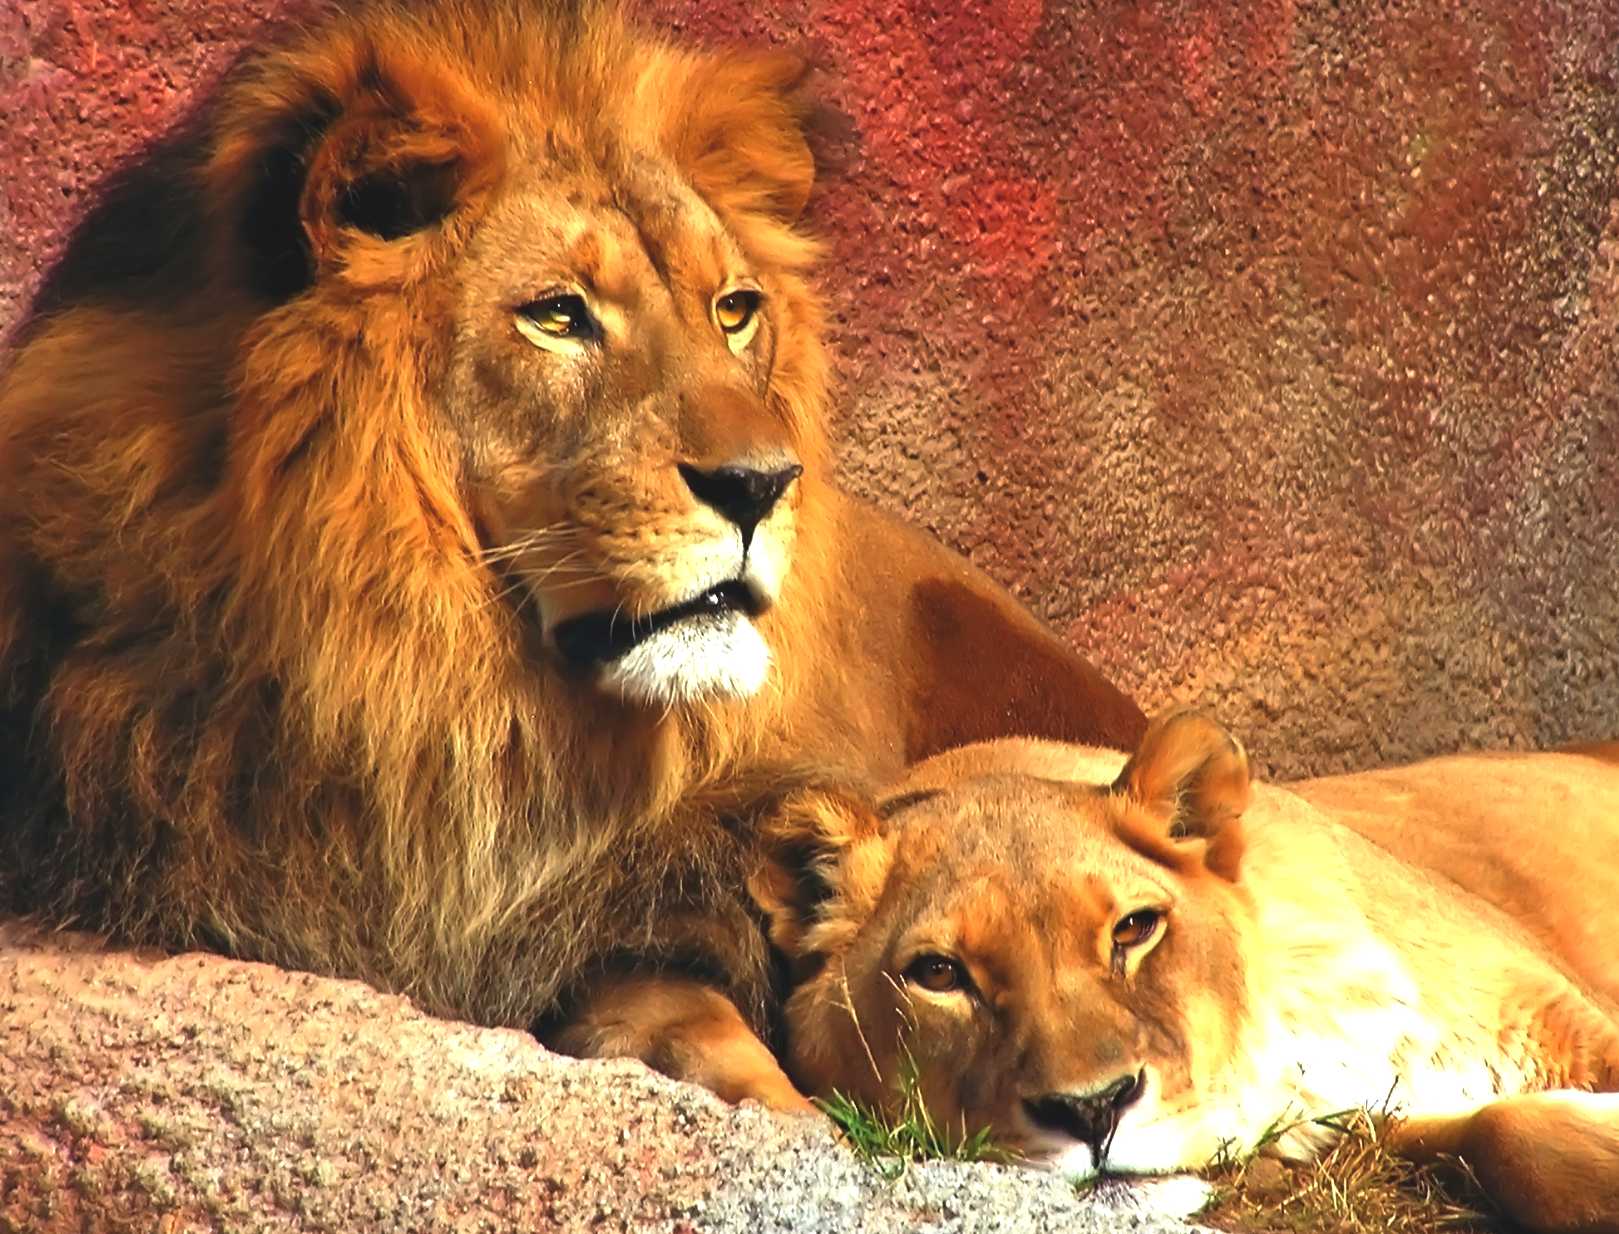 lion and lioness in the lions den, big cats at rest